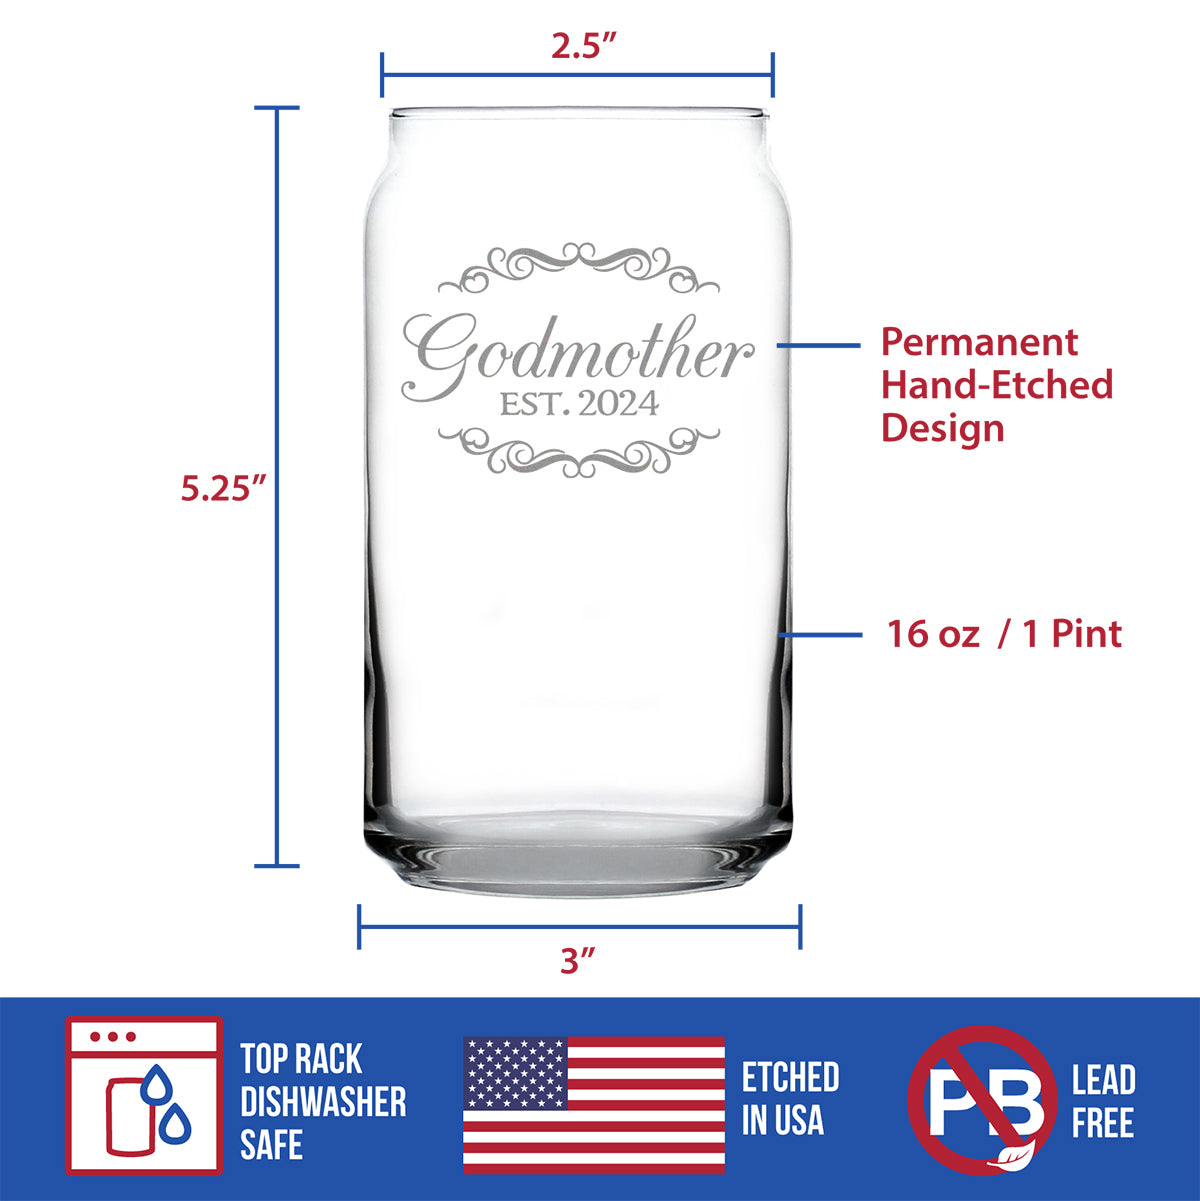 Godmother Est 2024 - New Godmother Beer Can Pint Glass Proposal Gift for First Time Godparents - Decorative 16 Oz Glasses